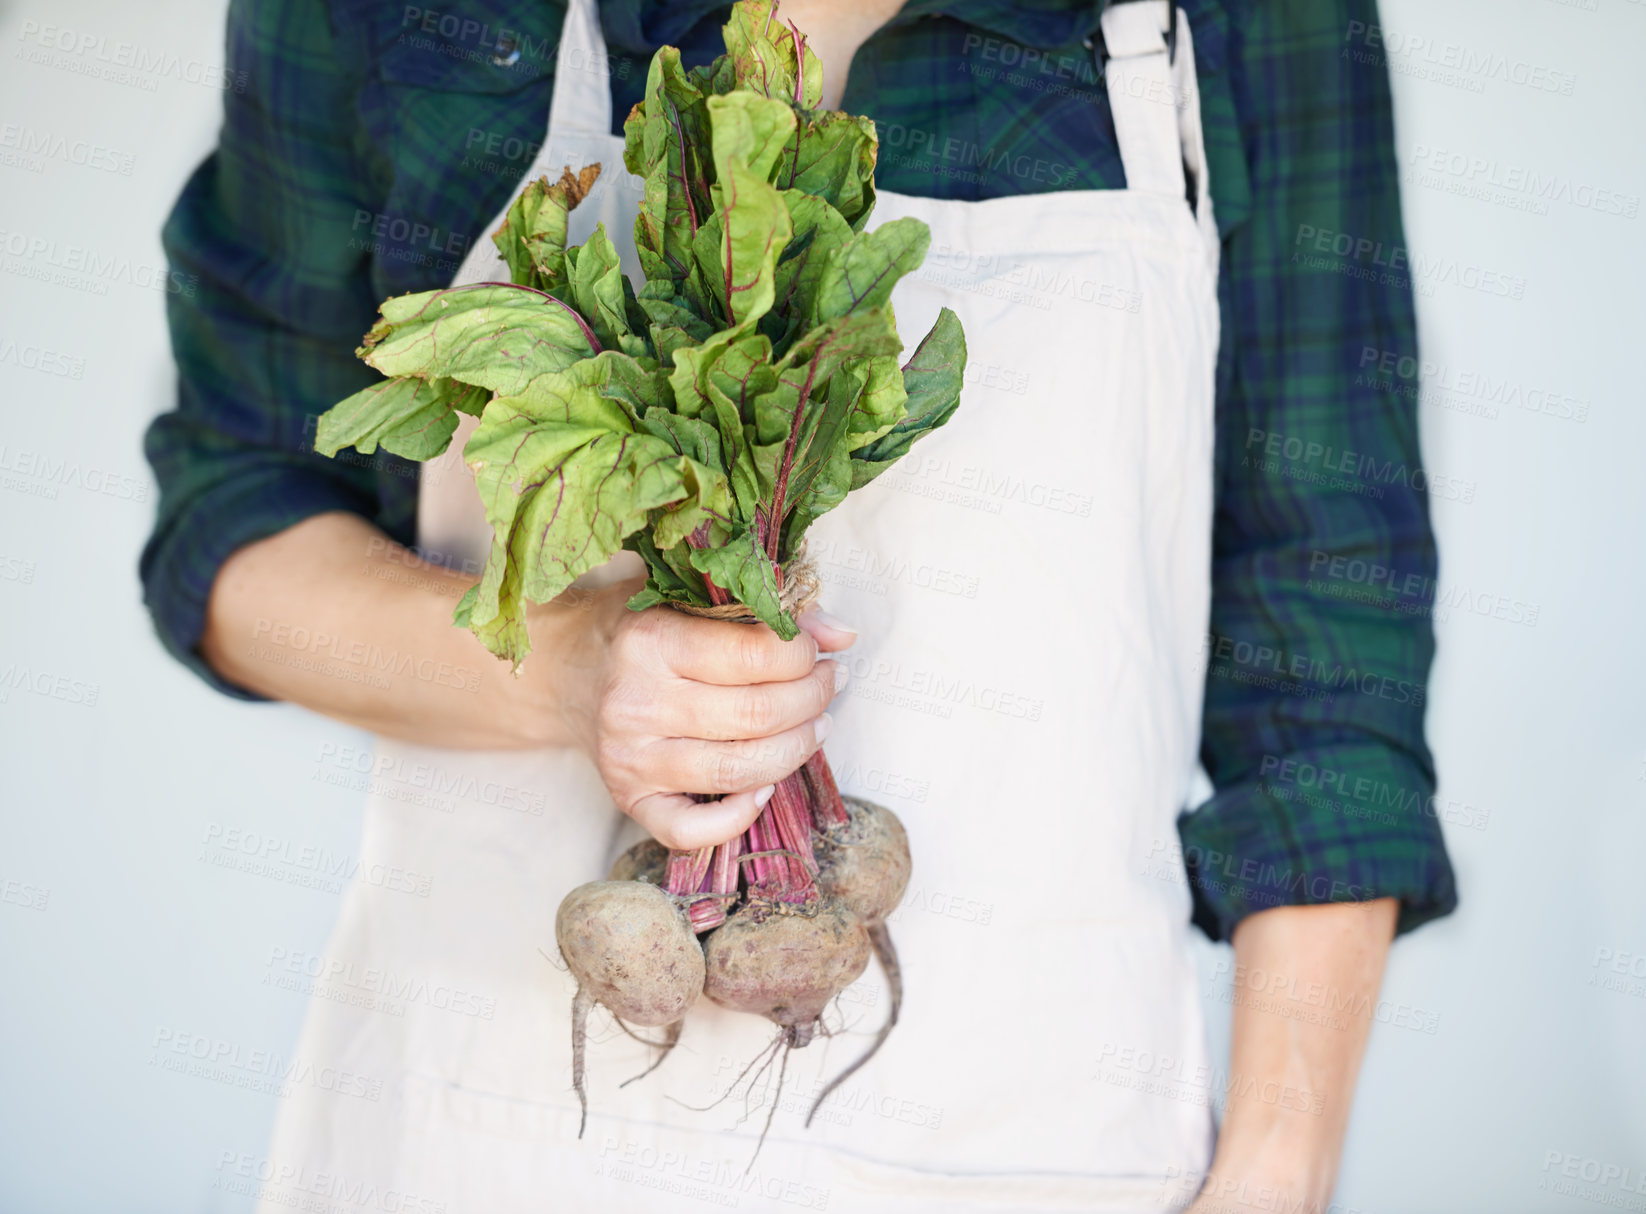 Buy stock photo Hands of person, fresh and farming with beetroot for agriculture, harvest or organic produce by wall. Vegetables, cultivation and farmer with apron for agro business, gardening or sustainability